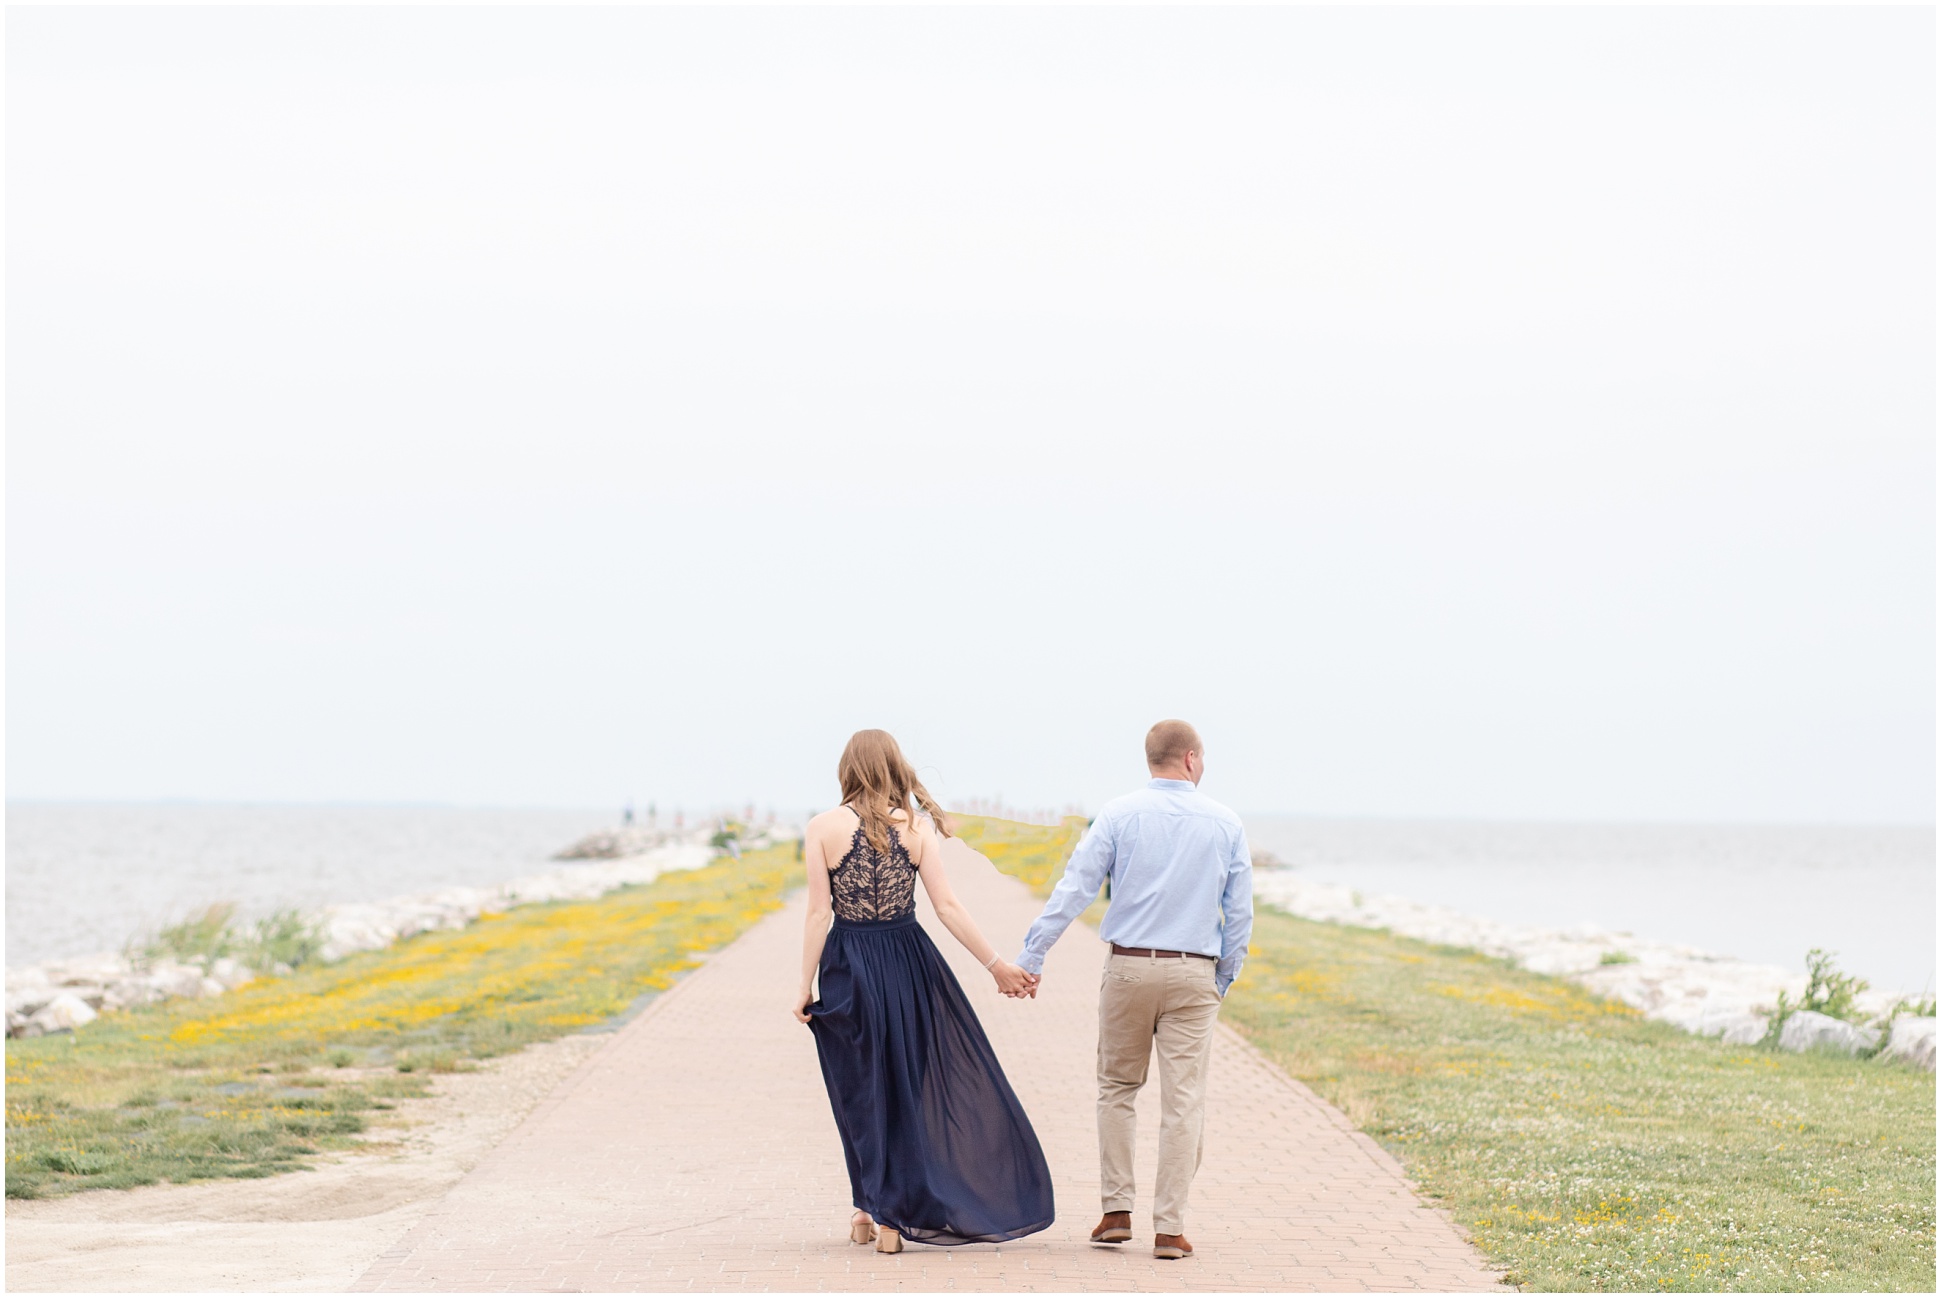 Bride-To-Be Wearing Long Navy Dress Walking Hand-in-hand with her fiance